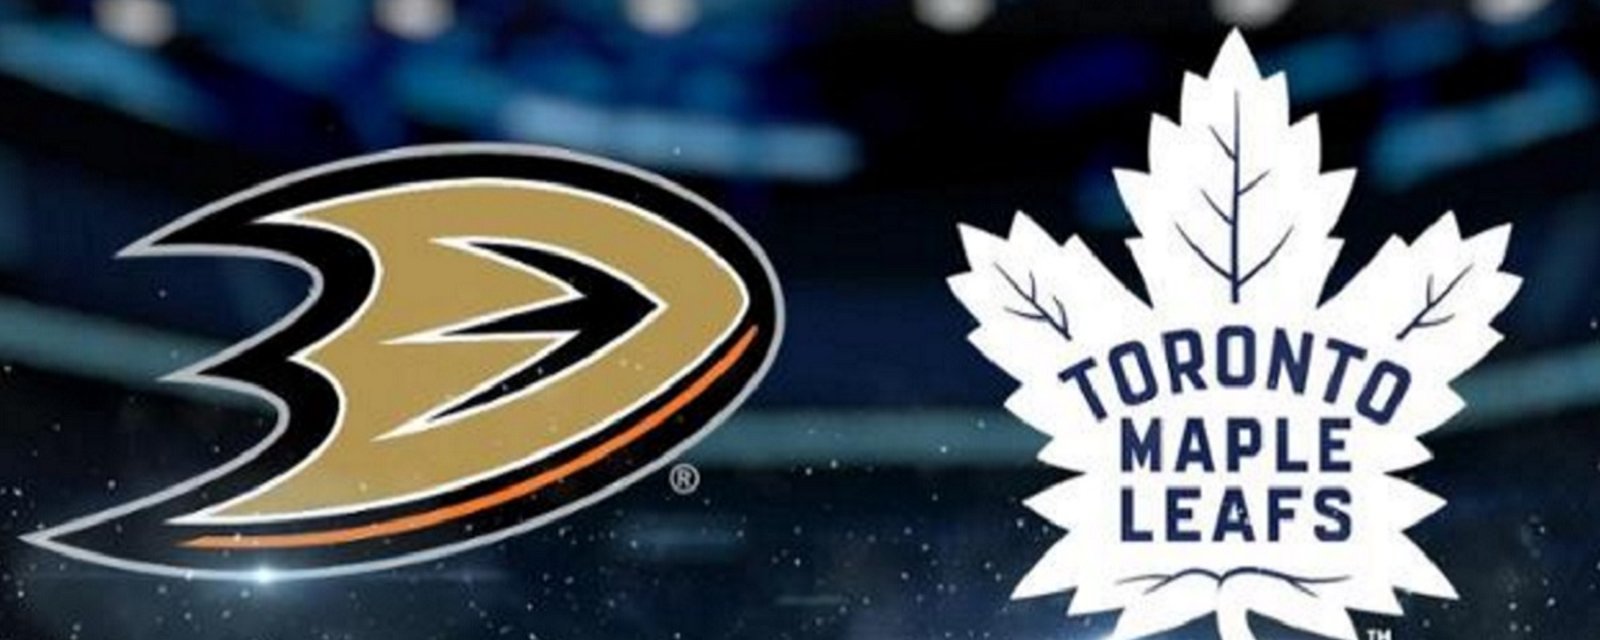 Breaking: Huge injuries may conflict with rumored trade between Ducks and Leafs.